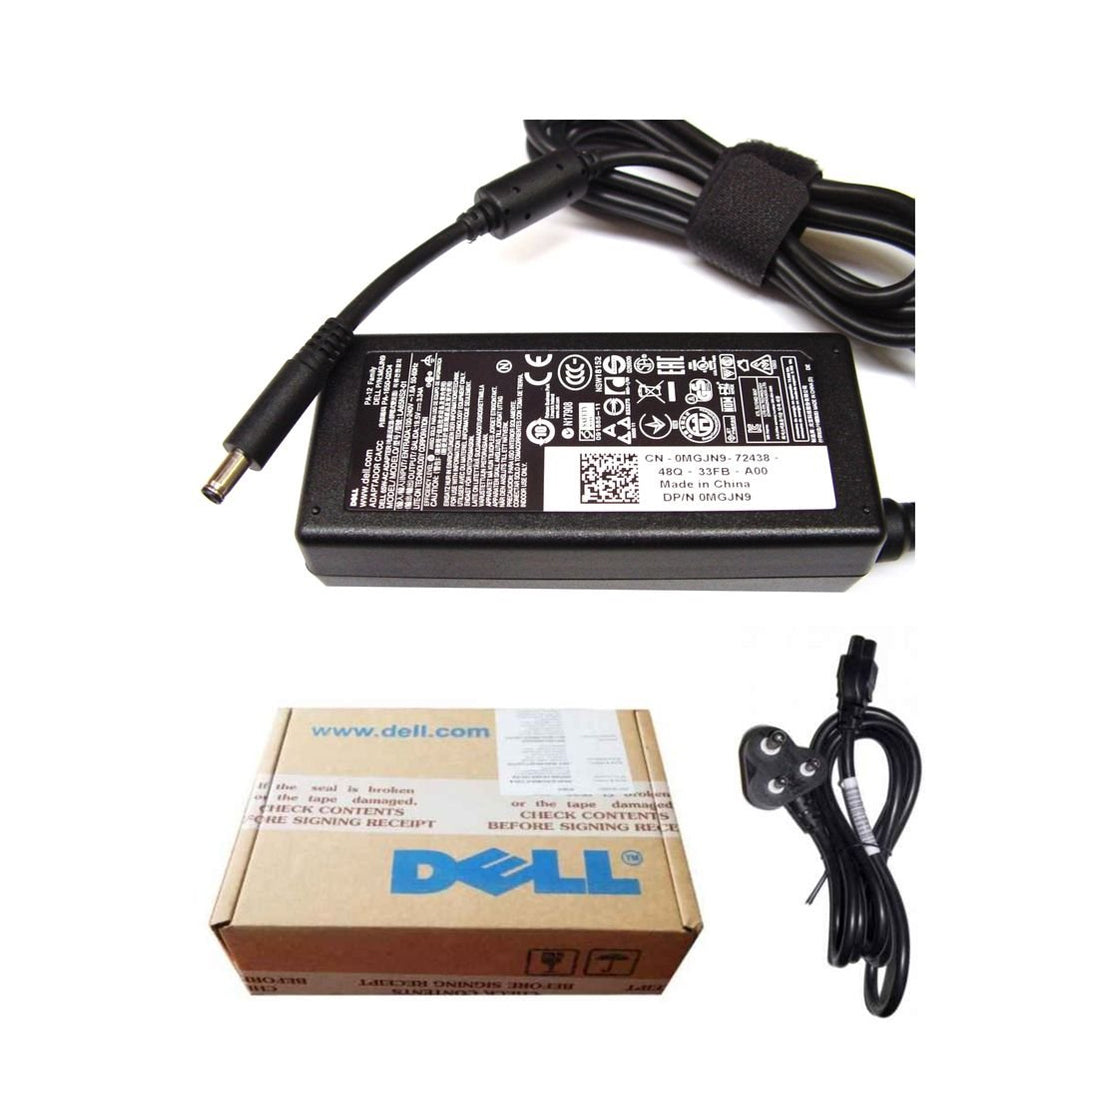 Dell Original 65W 19.5V 4.5mm Pin Laptop Charger Adapter for Inspiron 15 5567 With Power Cord